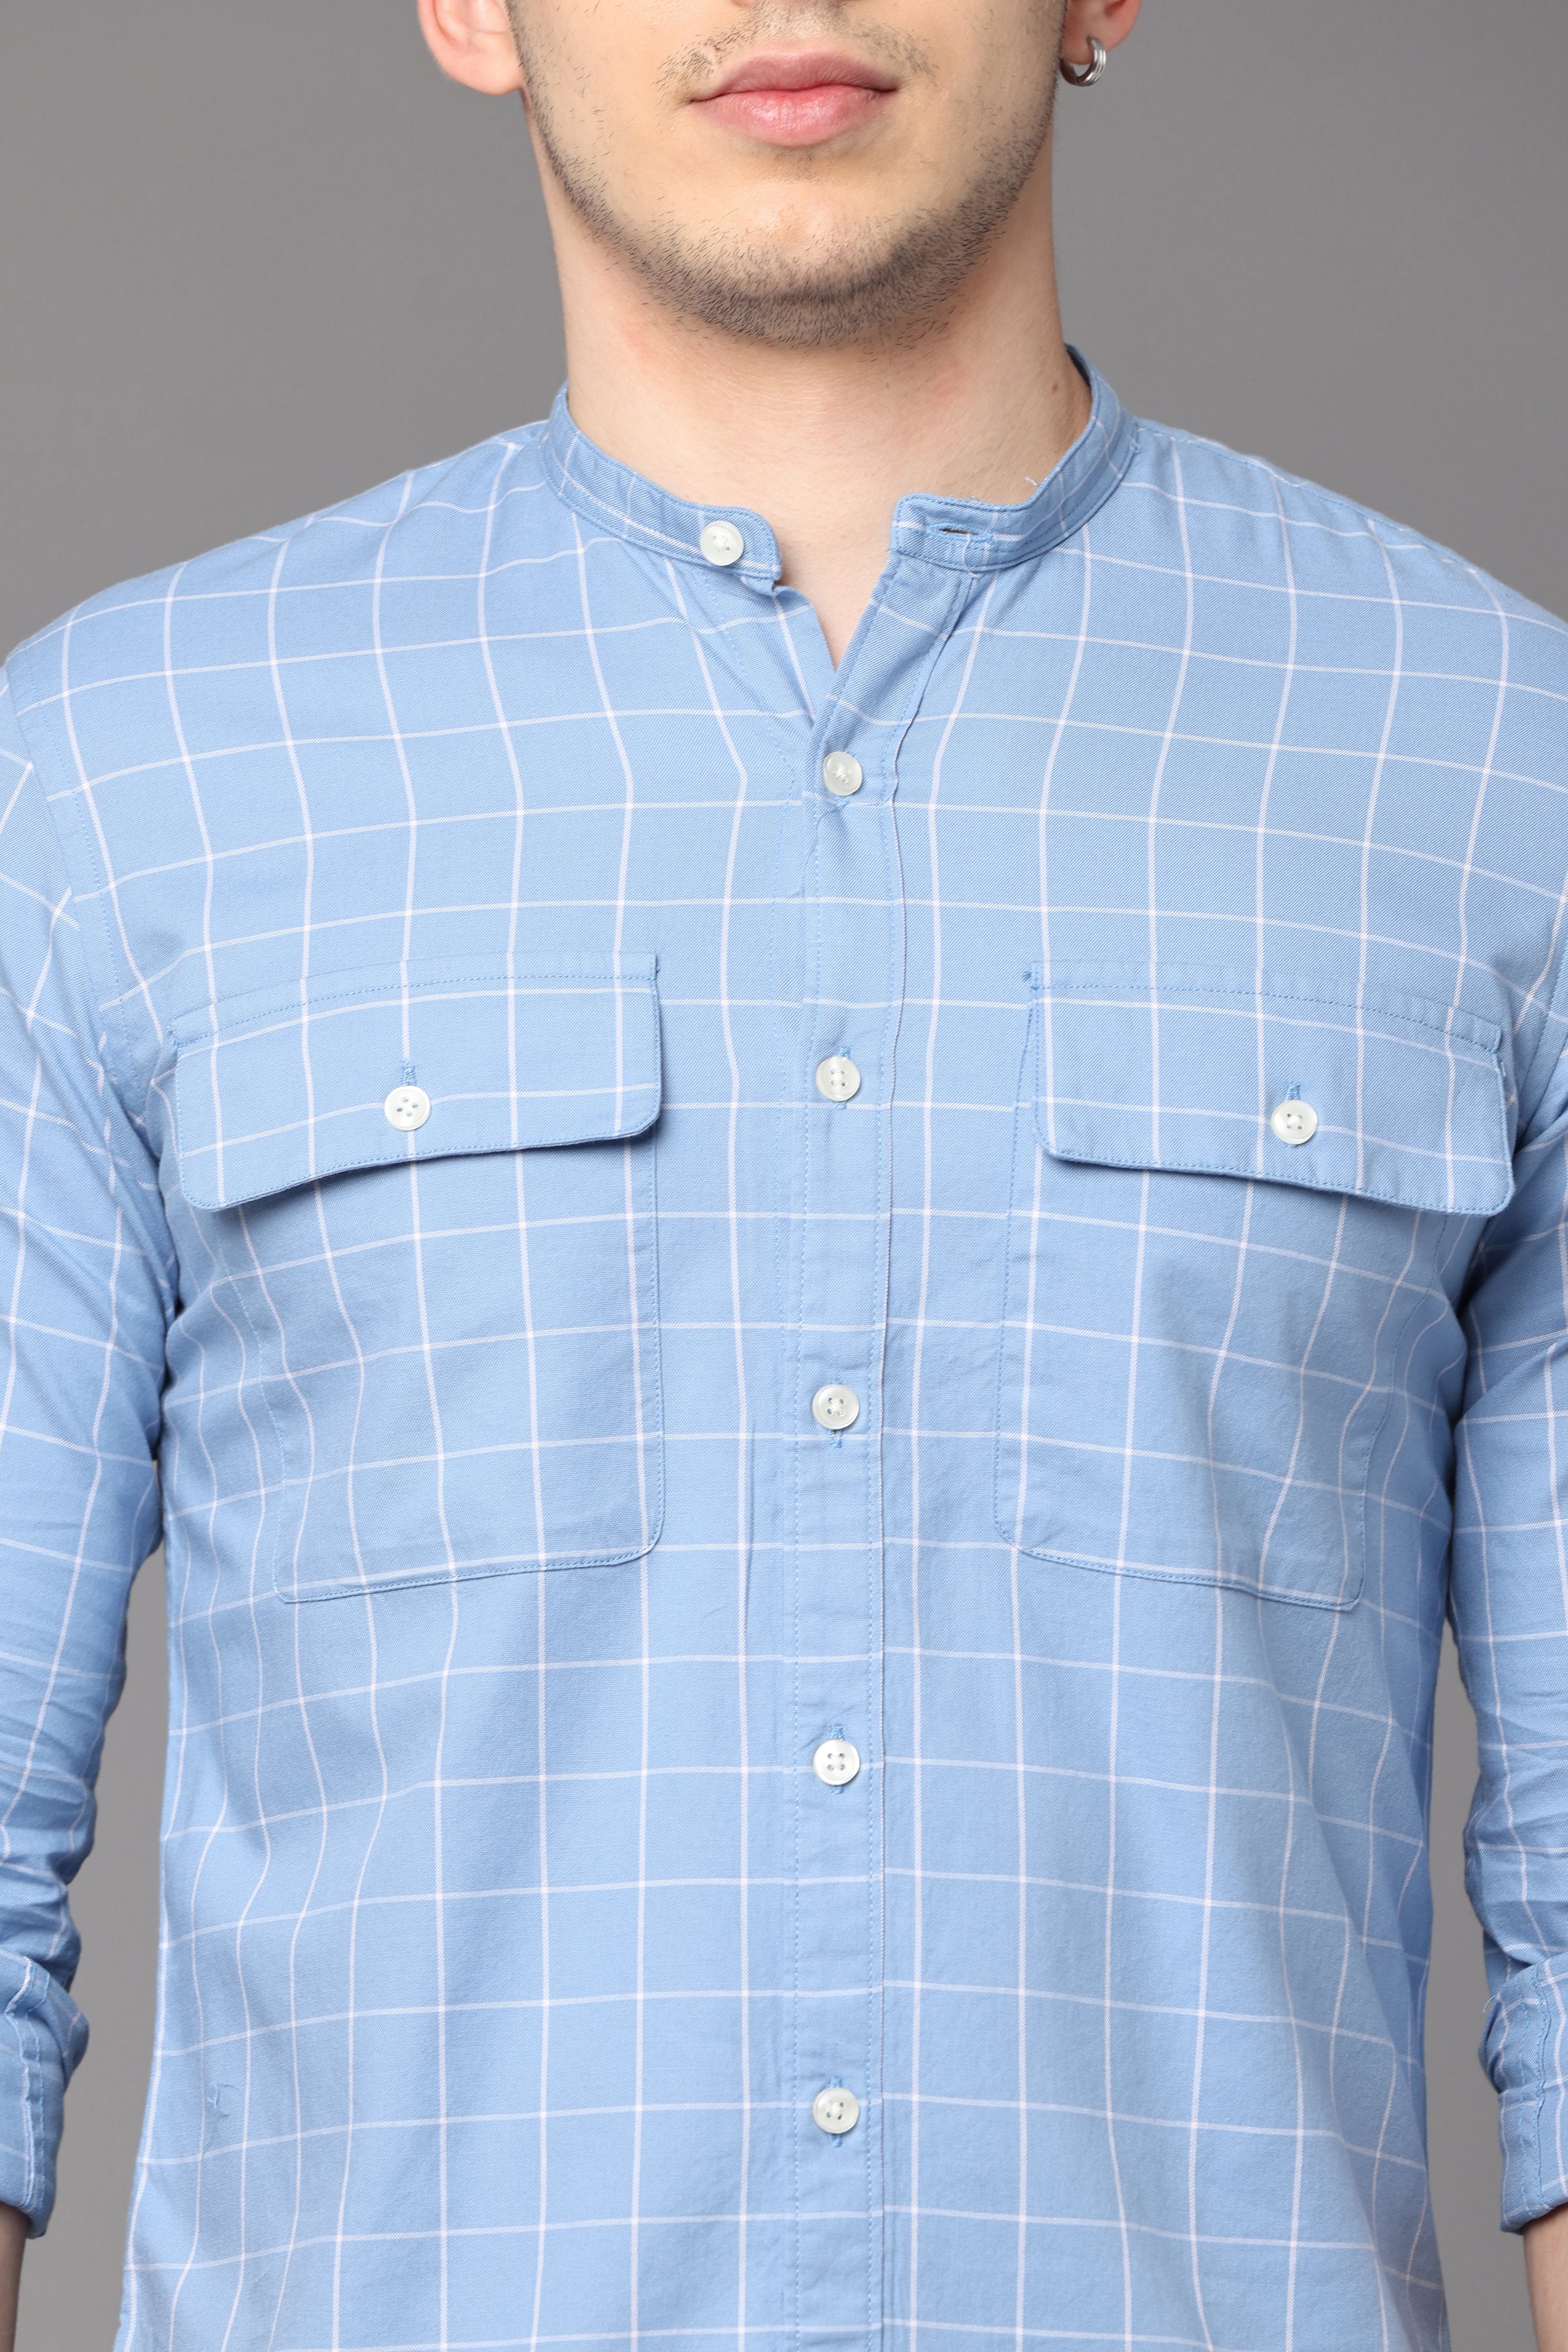 Beau Blue Check Shirt with Double Pocket Shirts Project 30 